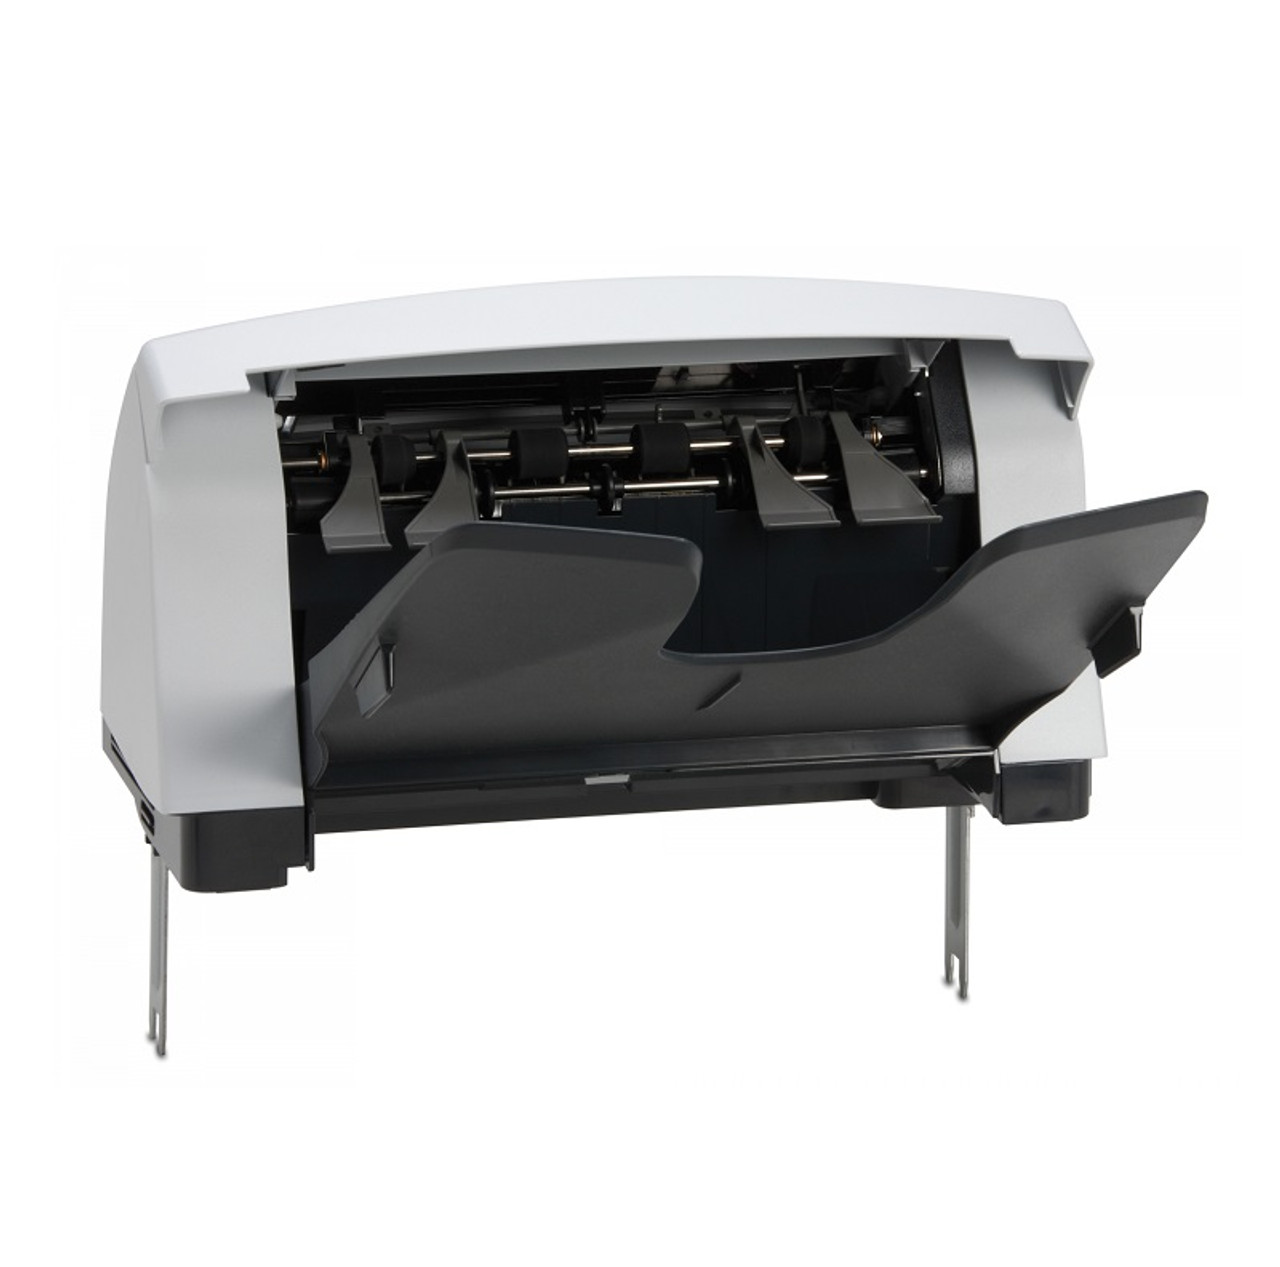 CE404A - HP LaserJet 500 Sheets Stacker for M601